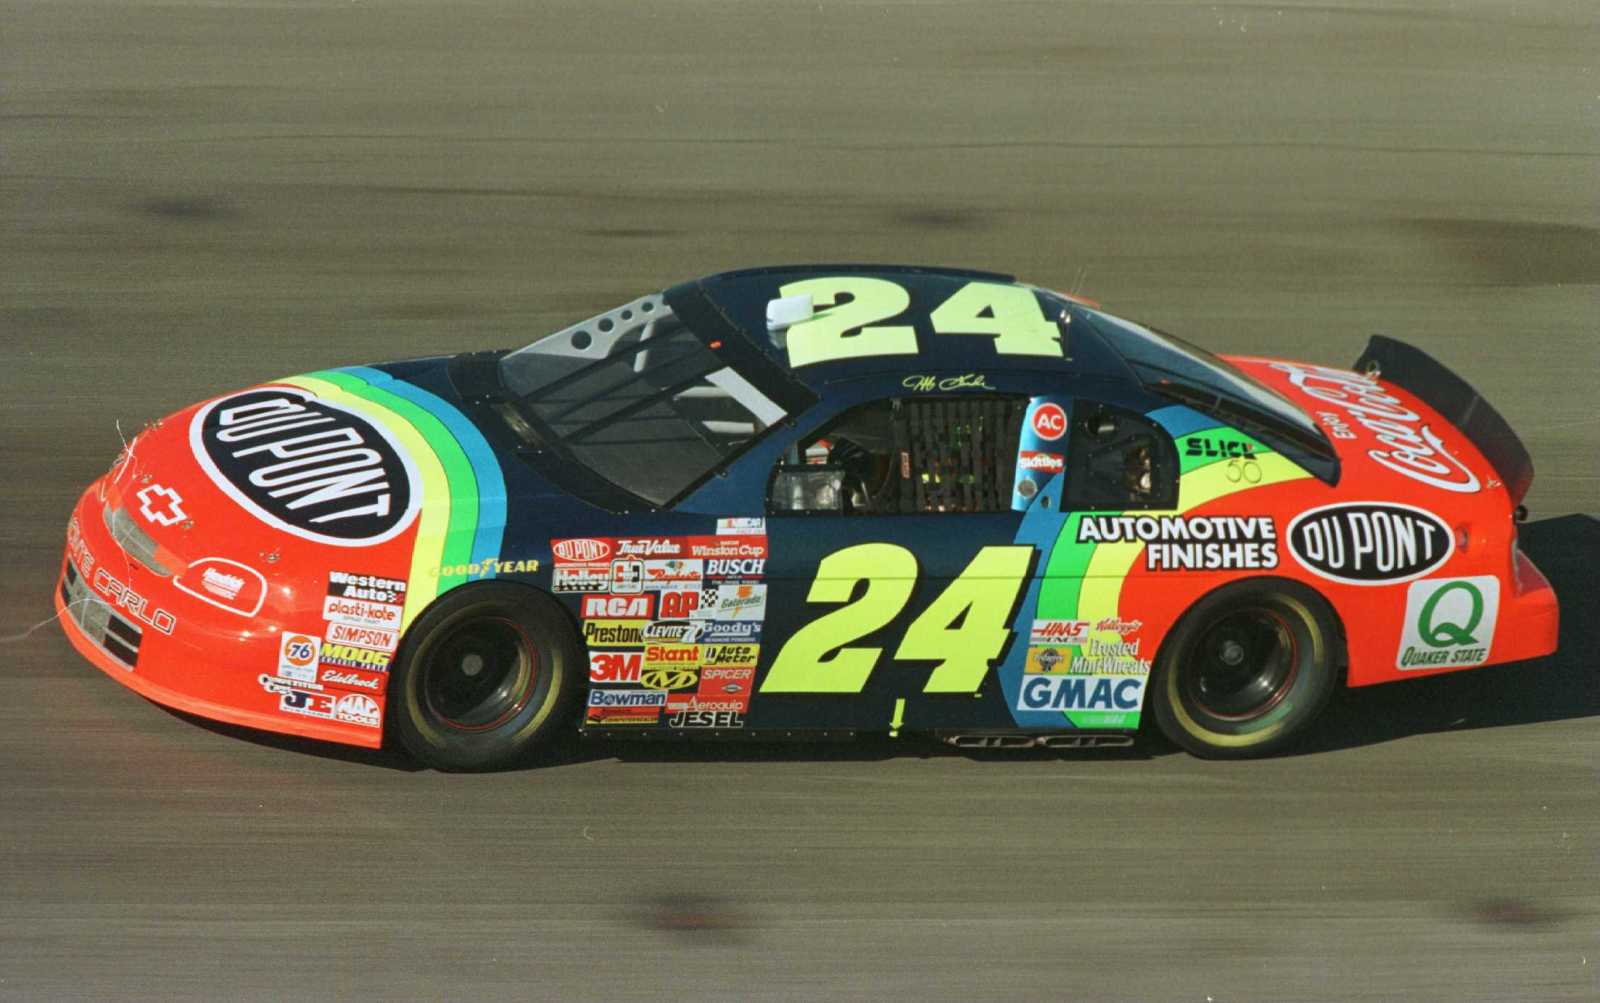 NASCAR: This race-winning Jeff Gordon car can be yours